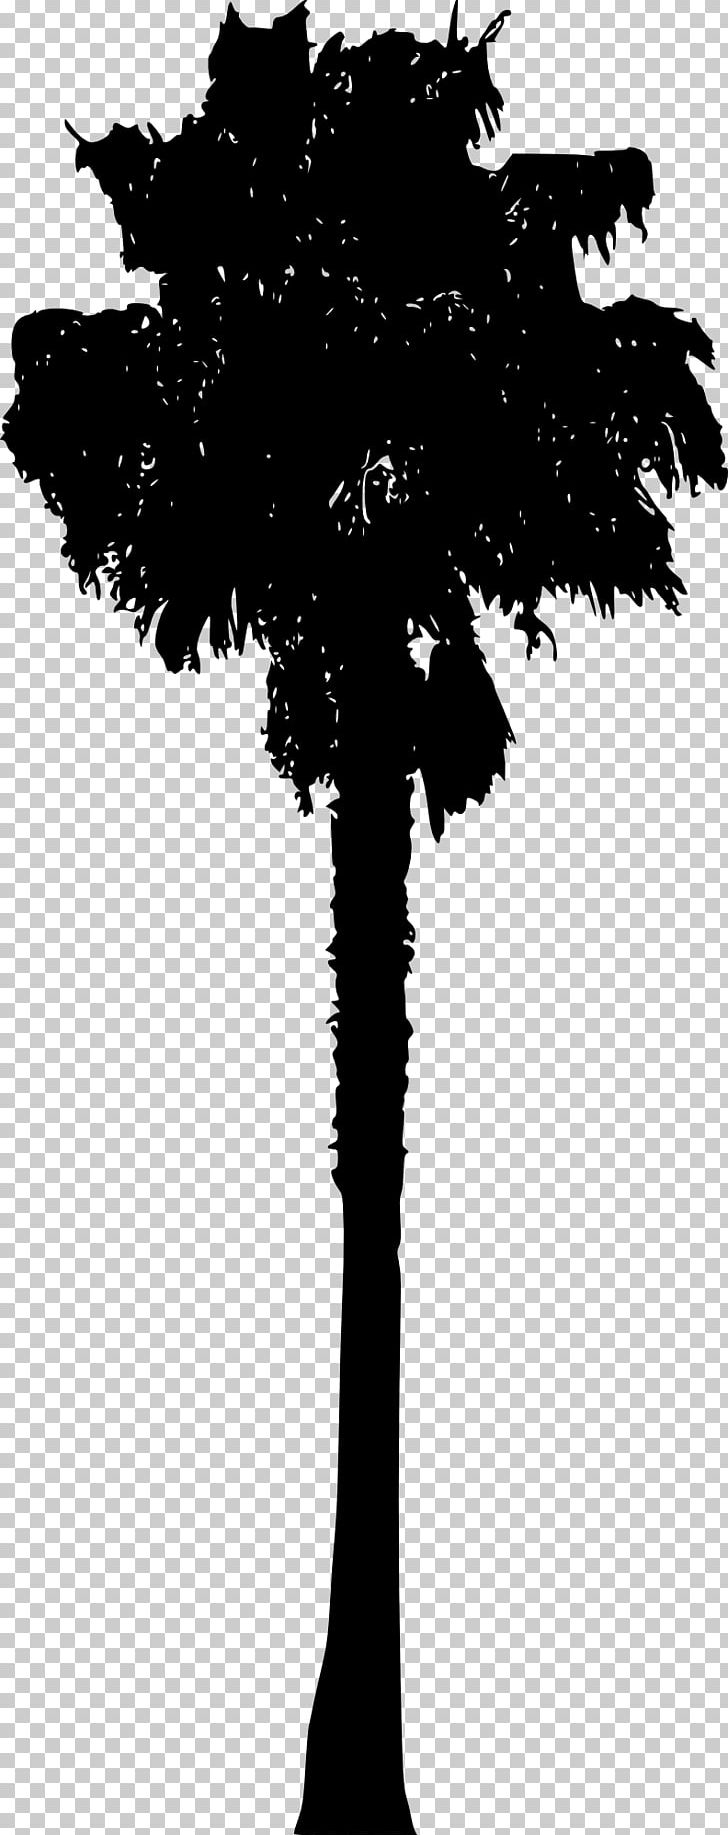 Arecaceae Silhouette PNG, Clipart, Animals, Arecaceae, Black And White, Branch, Flowering Plant Free PNG Download